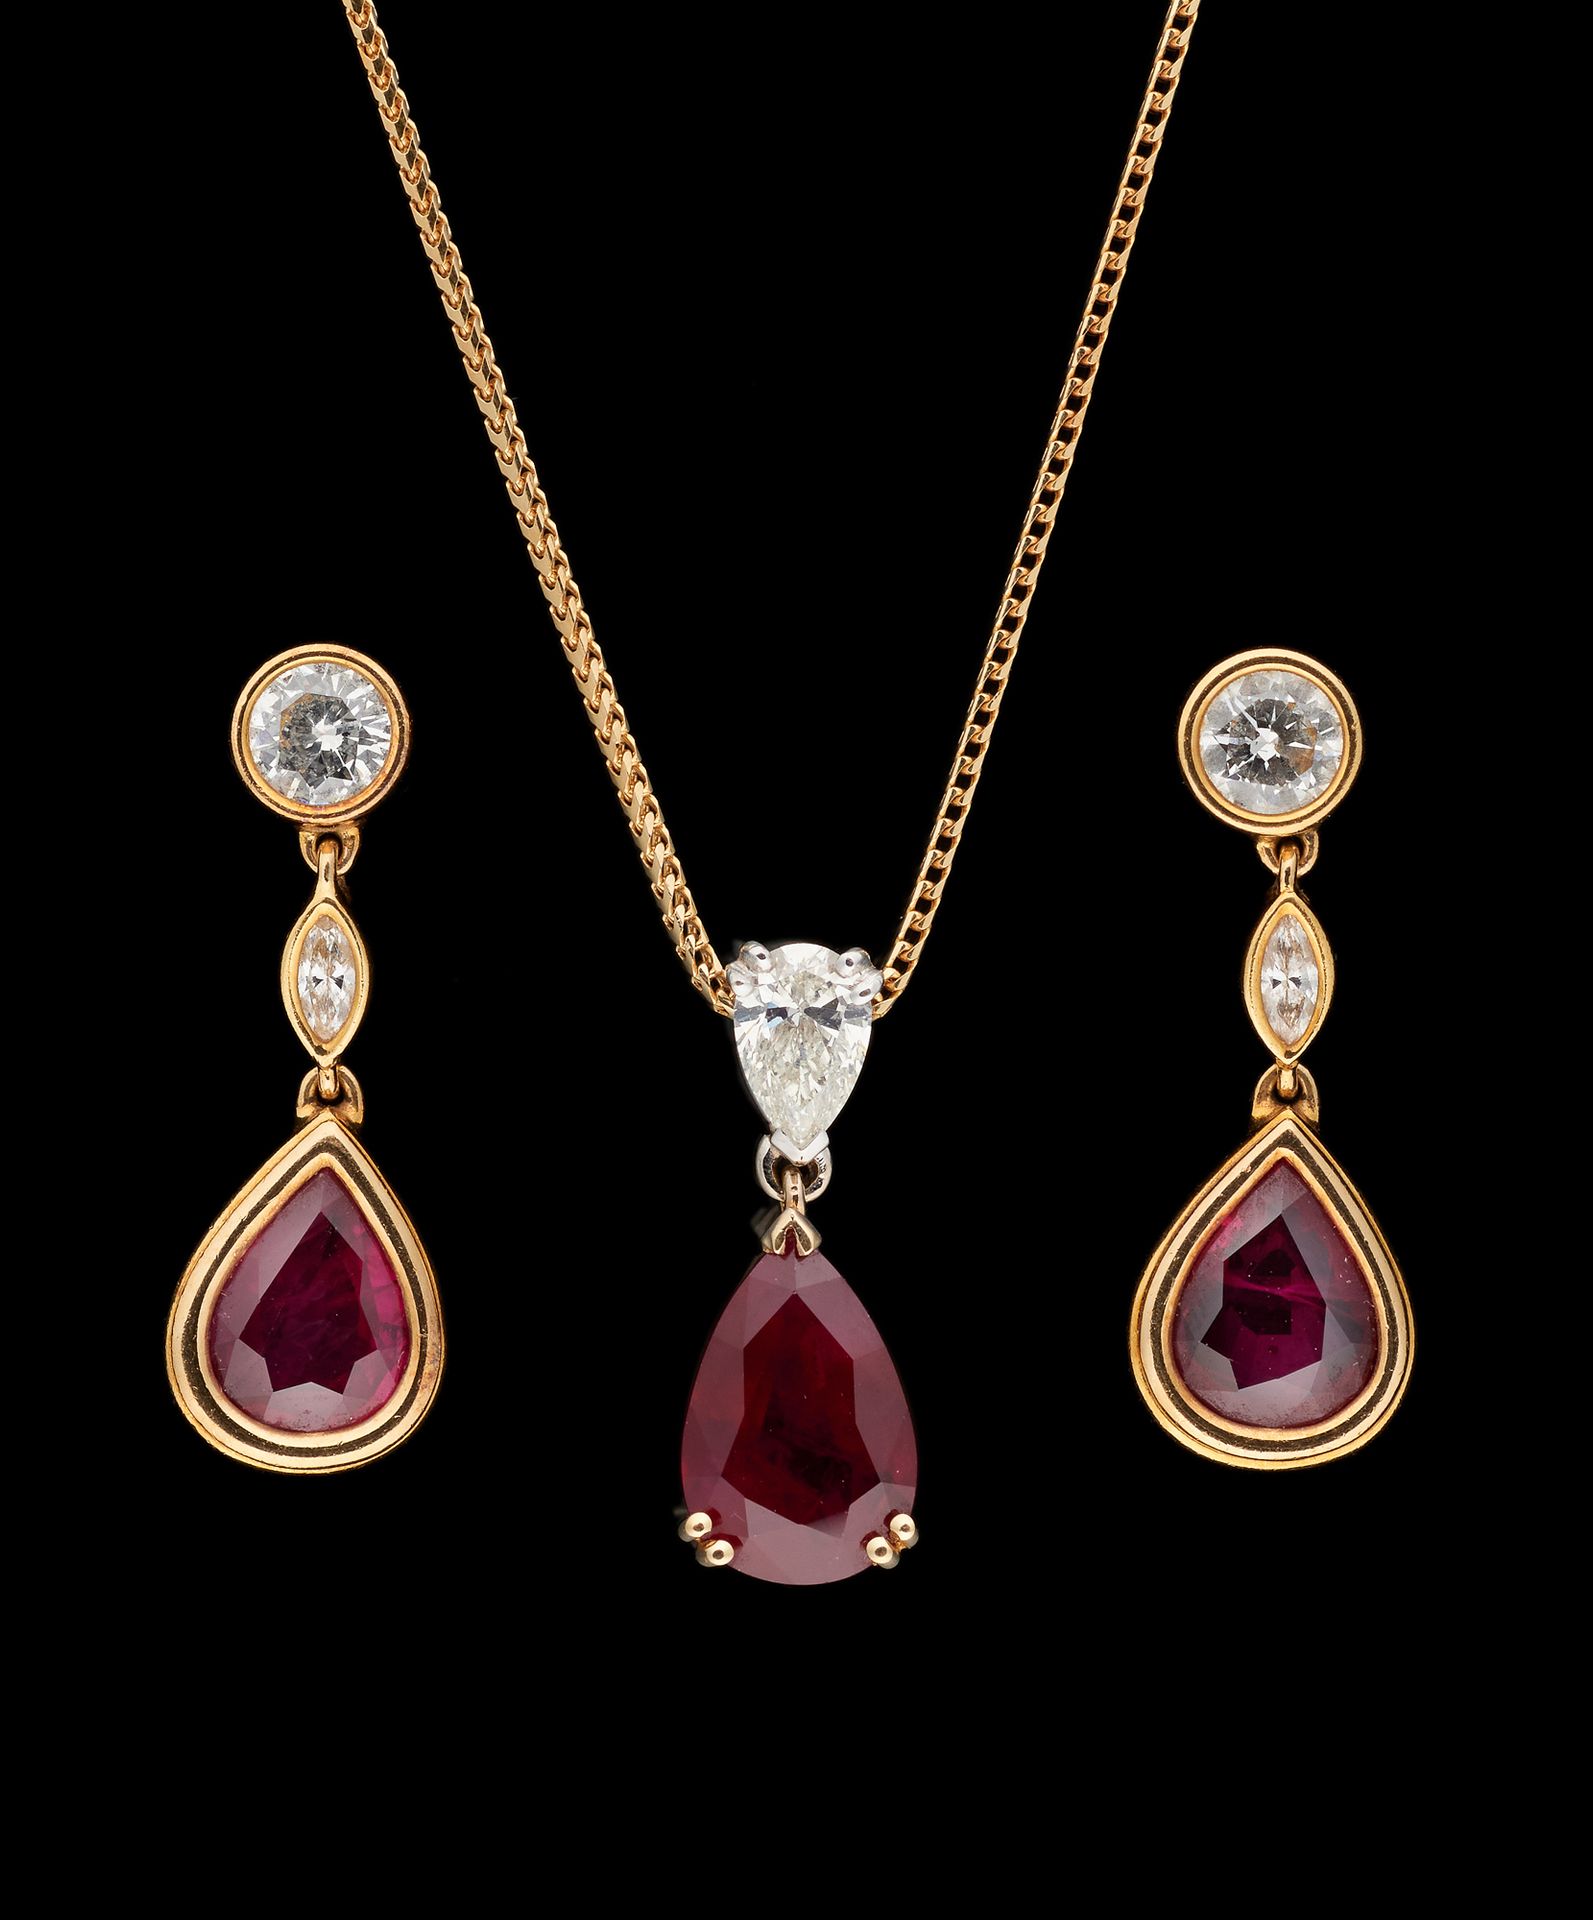 Joaillerie. Jewelry: Lot consisting of a pair of earrings and a pendant necklace&hellip;